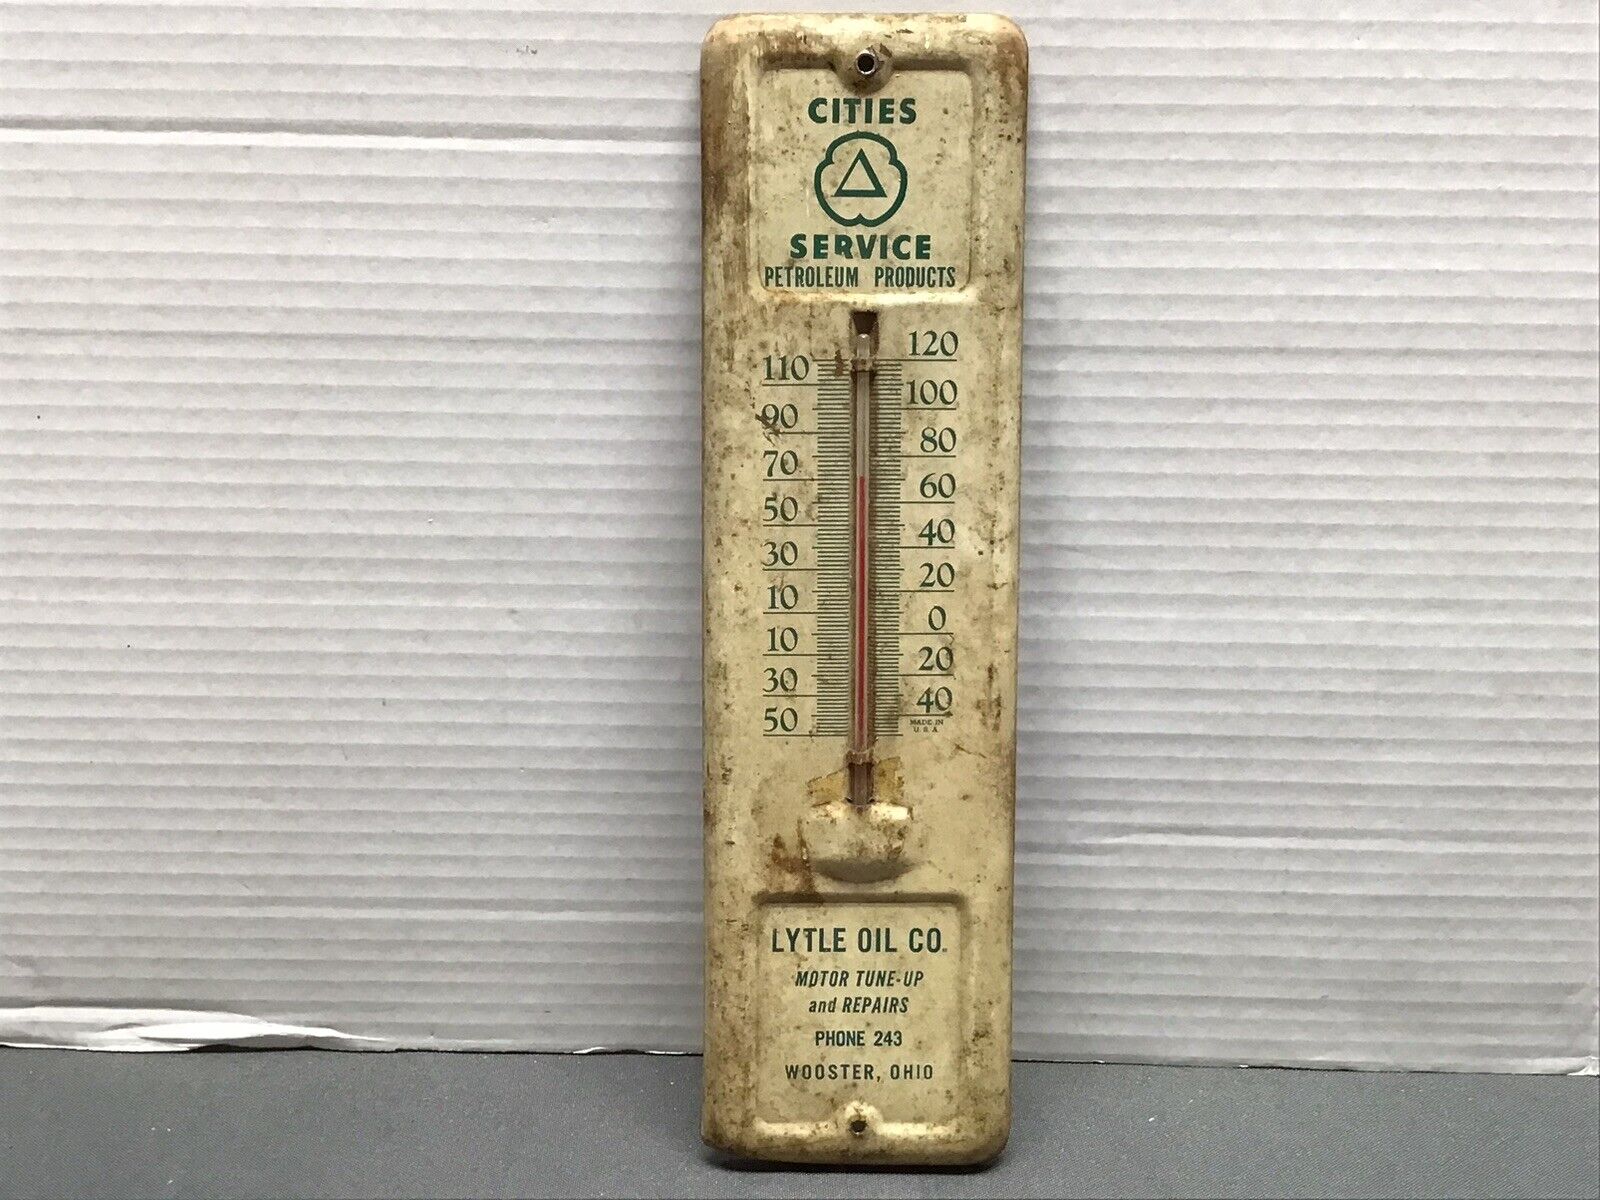 Cities Service Thermometer Wooster Ohio.Vintage